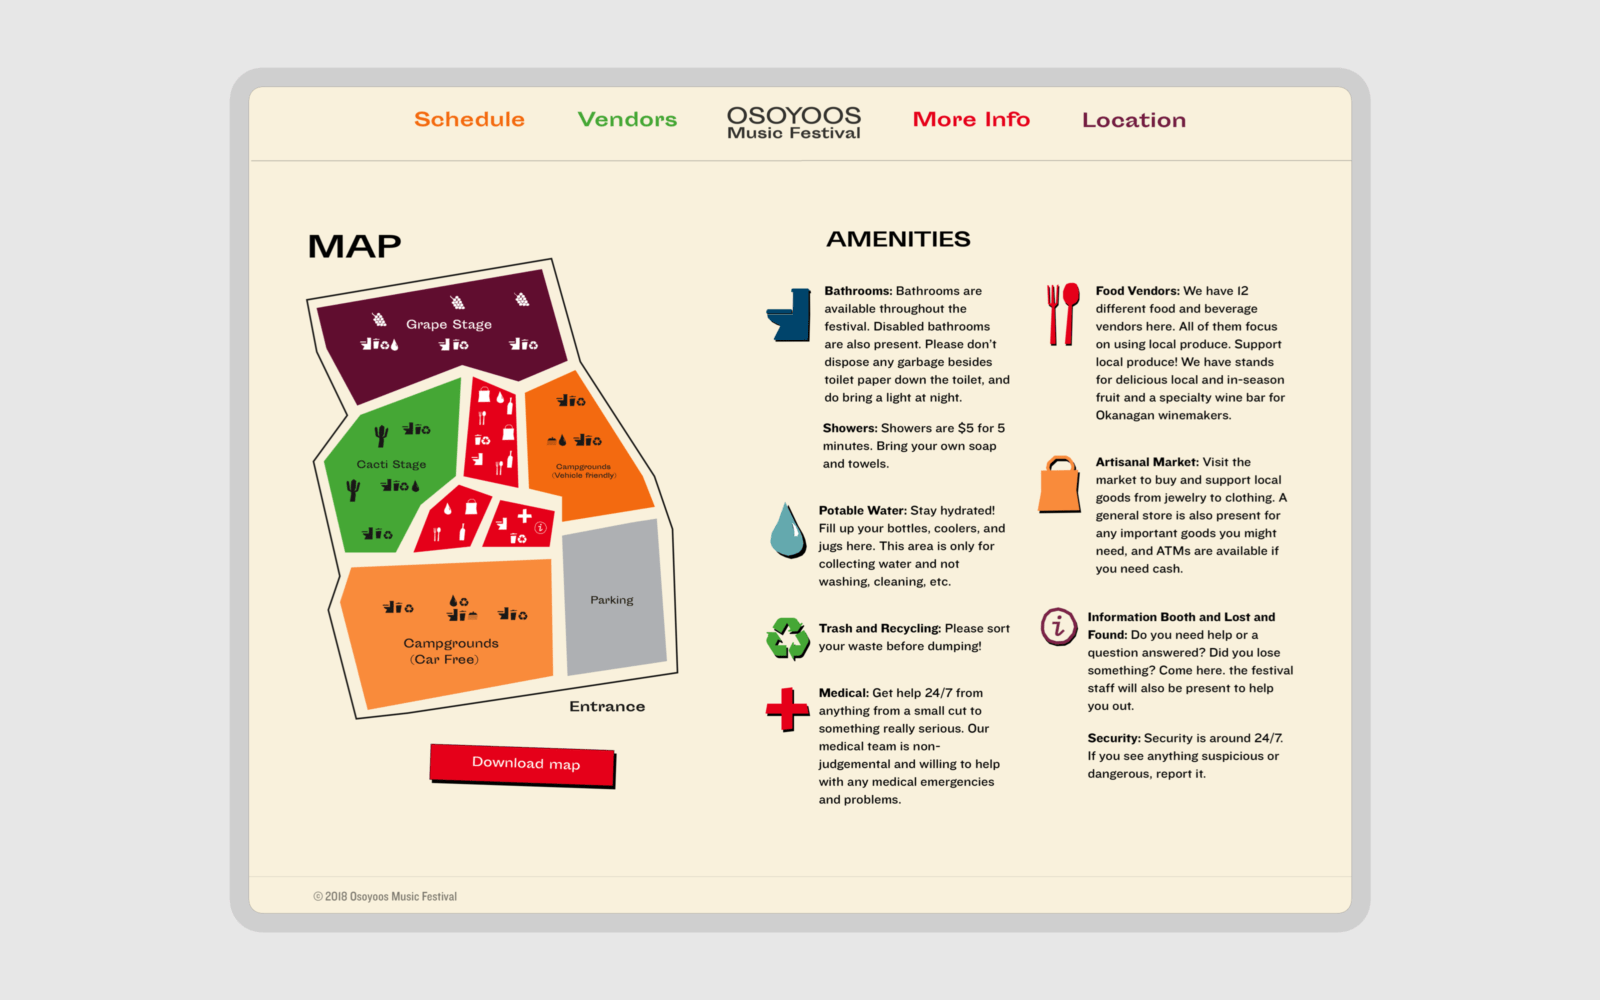 Website mocup: desktop view. The event map and amenities are shown.